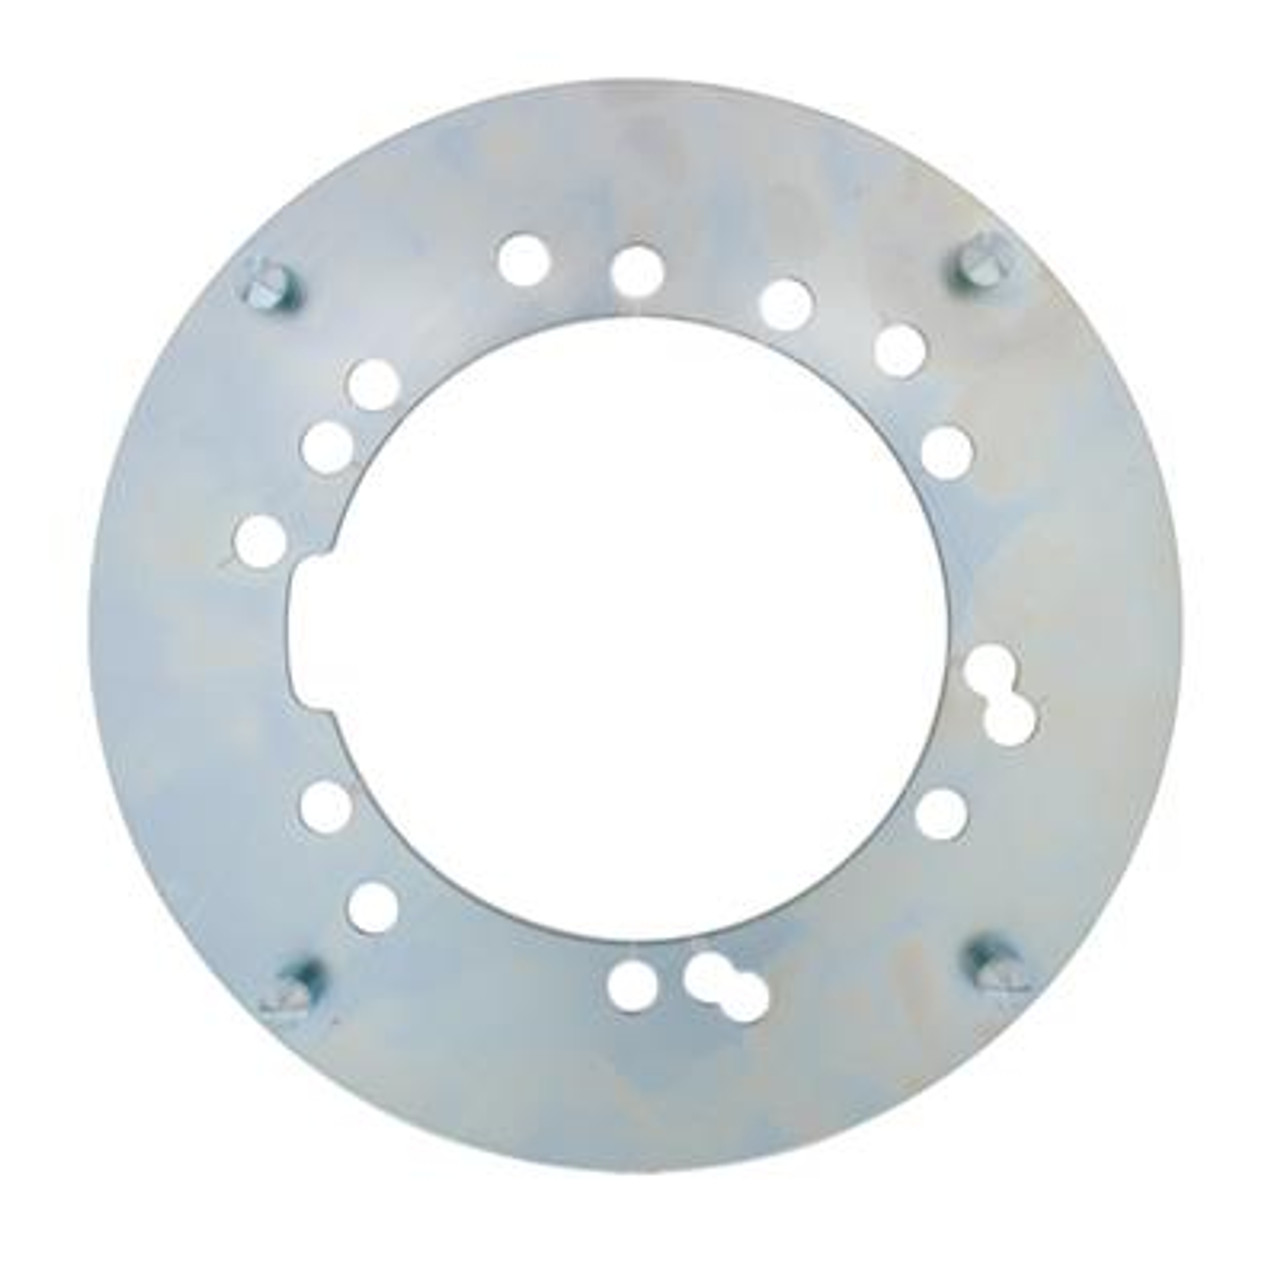 United Pacific carry tons of different hub caps in various styles from three-bar spinners, domes, to pointed hubcaps. Our hubcaps are compatible with 4, 5, and 6 notch configurations and universal applications too!